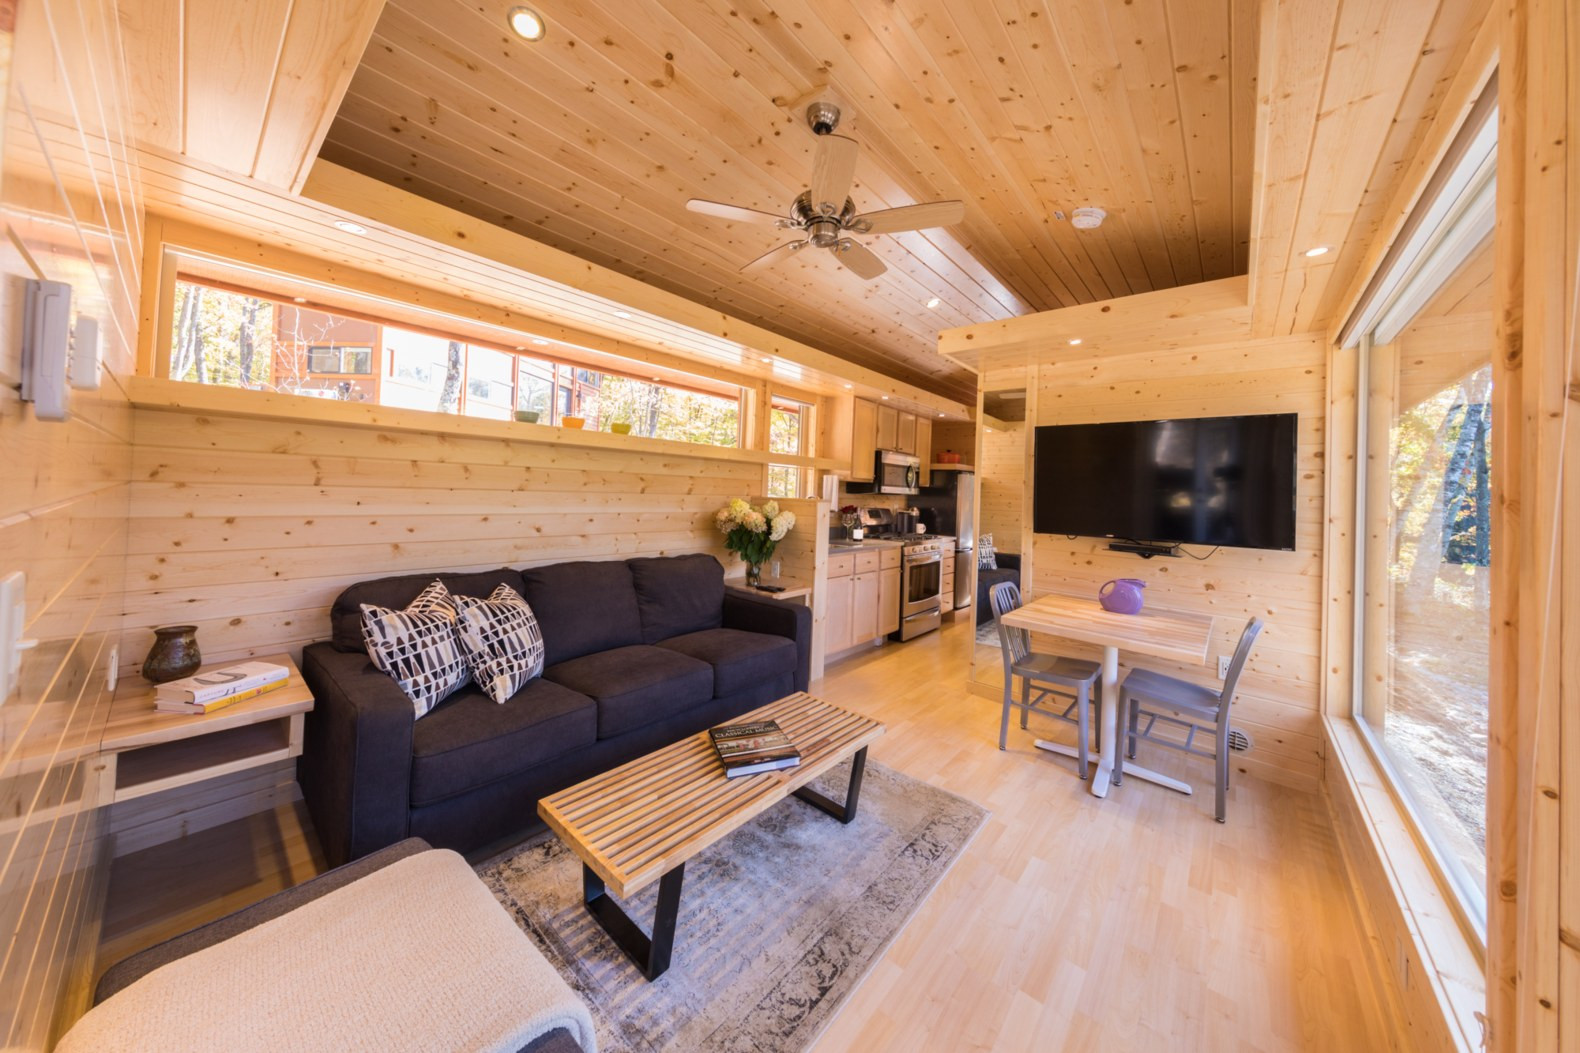 Small House Living Room
 Tiny home resort opens in idyllic Wisconsin forest setting